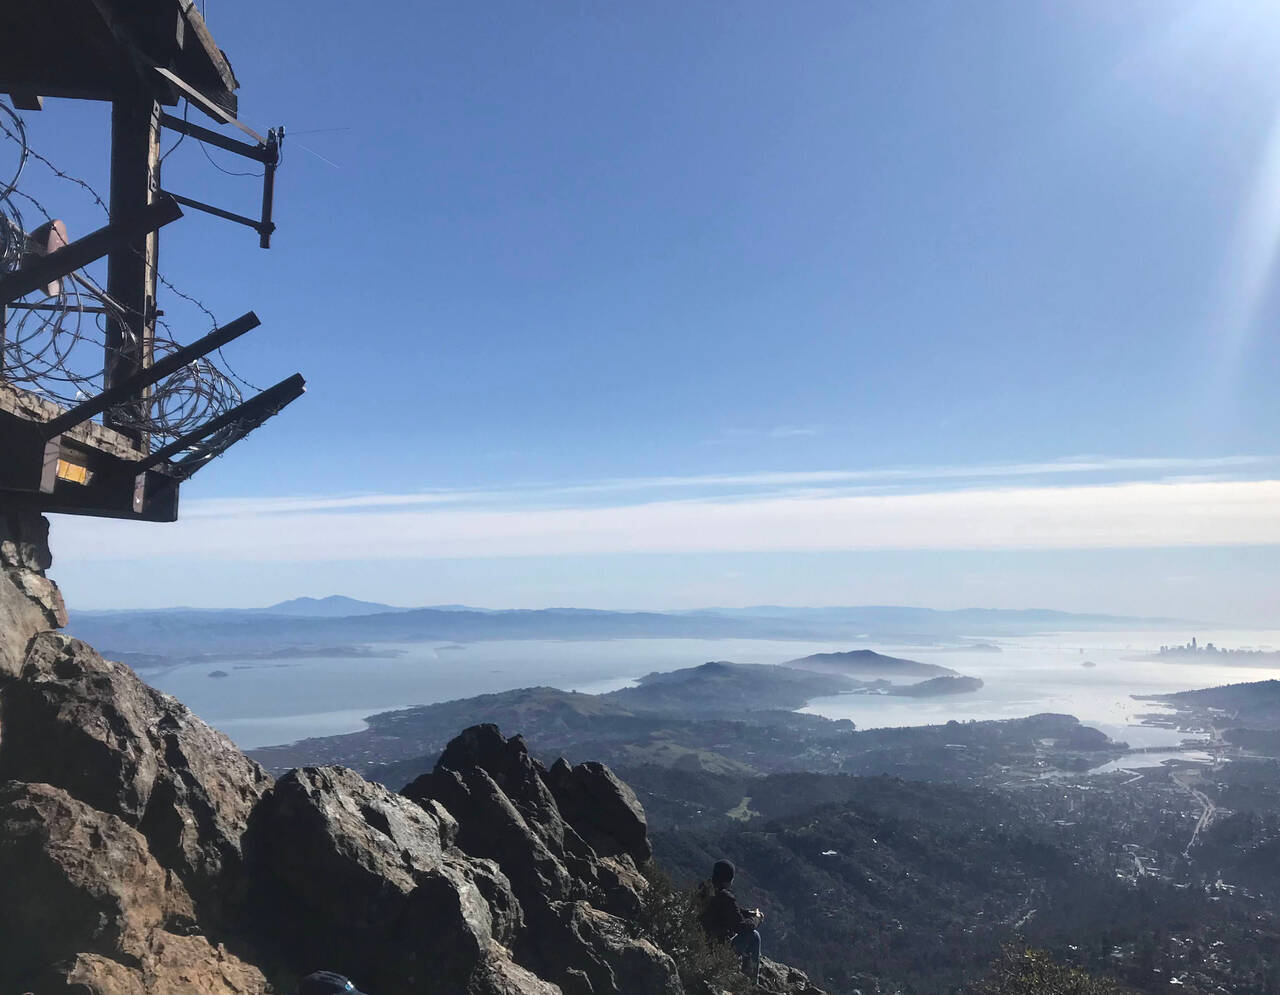 Overlooking the Bay Area, next to the fenced off observation platform of the East Peak of Mount Tam